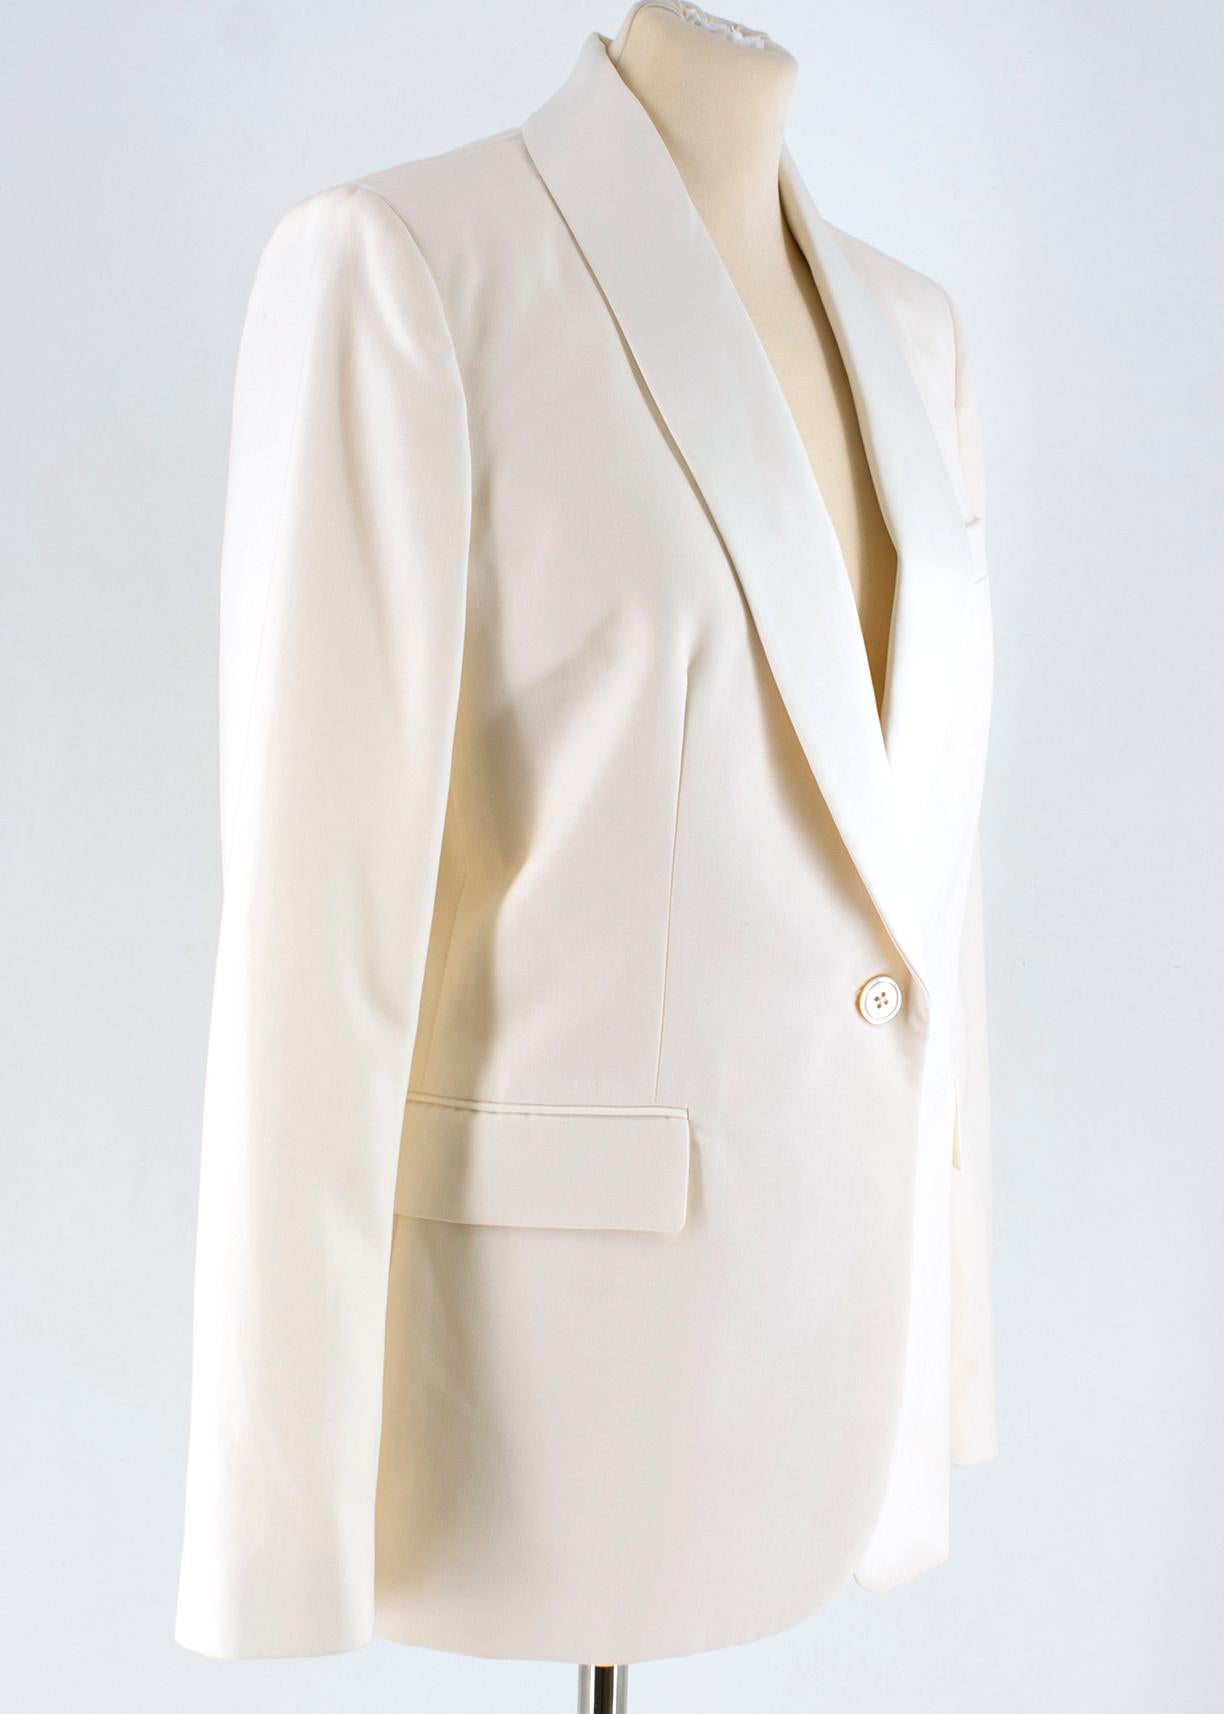 Polo Ralph Lauren White Wool Blazer

- white wool blazer
- single breasted
- one button fastening to the front 
- satin notch lapels
- padded shoulders
- lined

Please note, these items are pre-owned and may show some signs of storage, even when